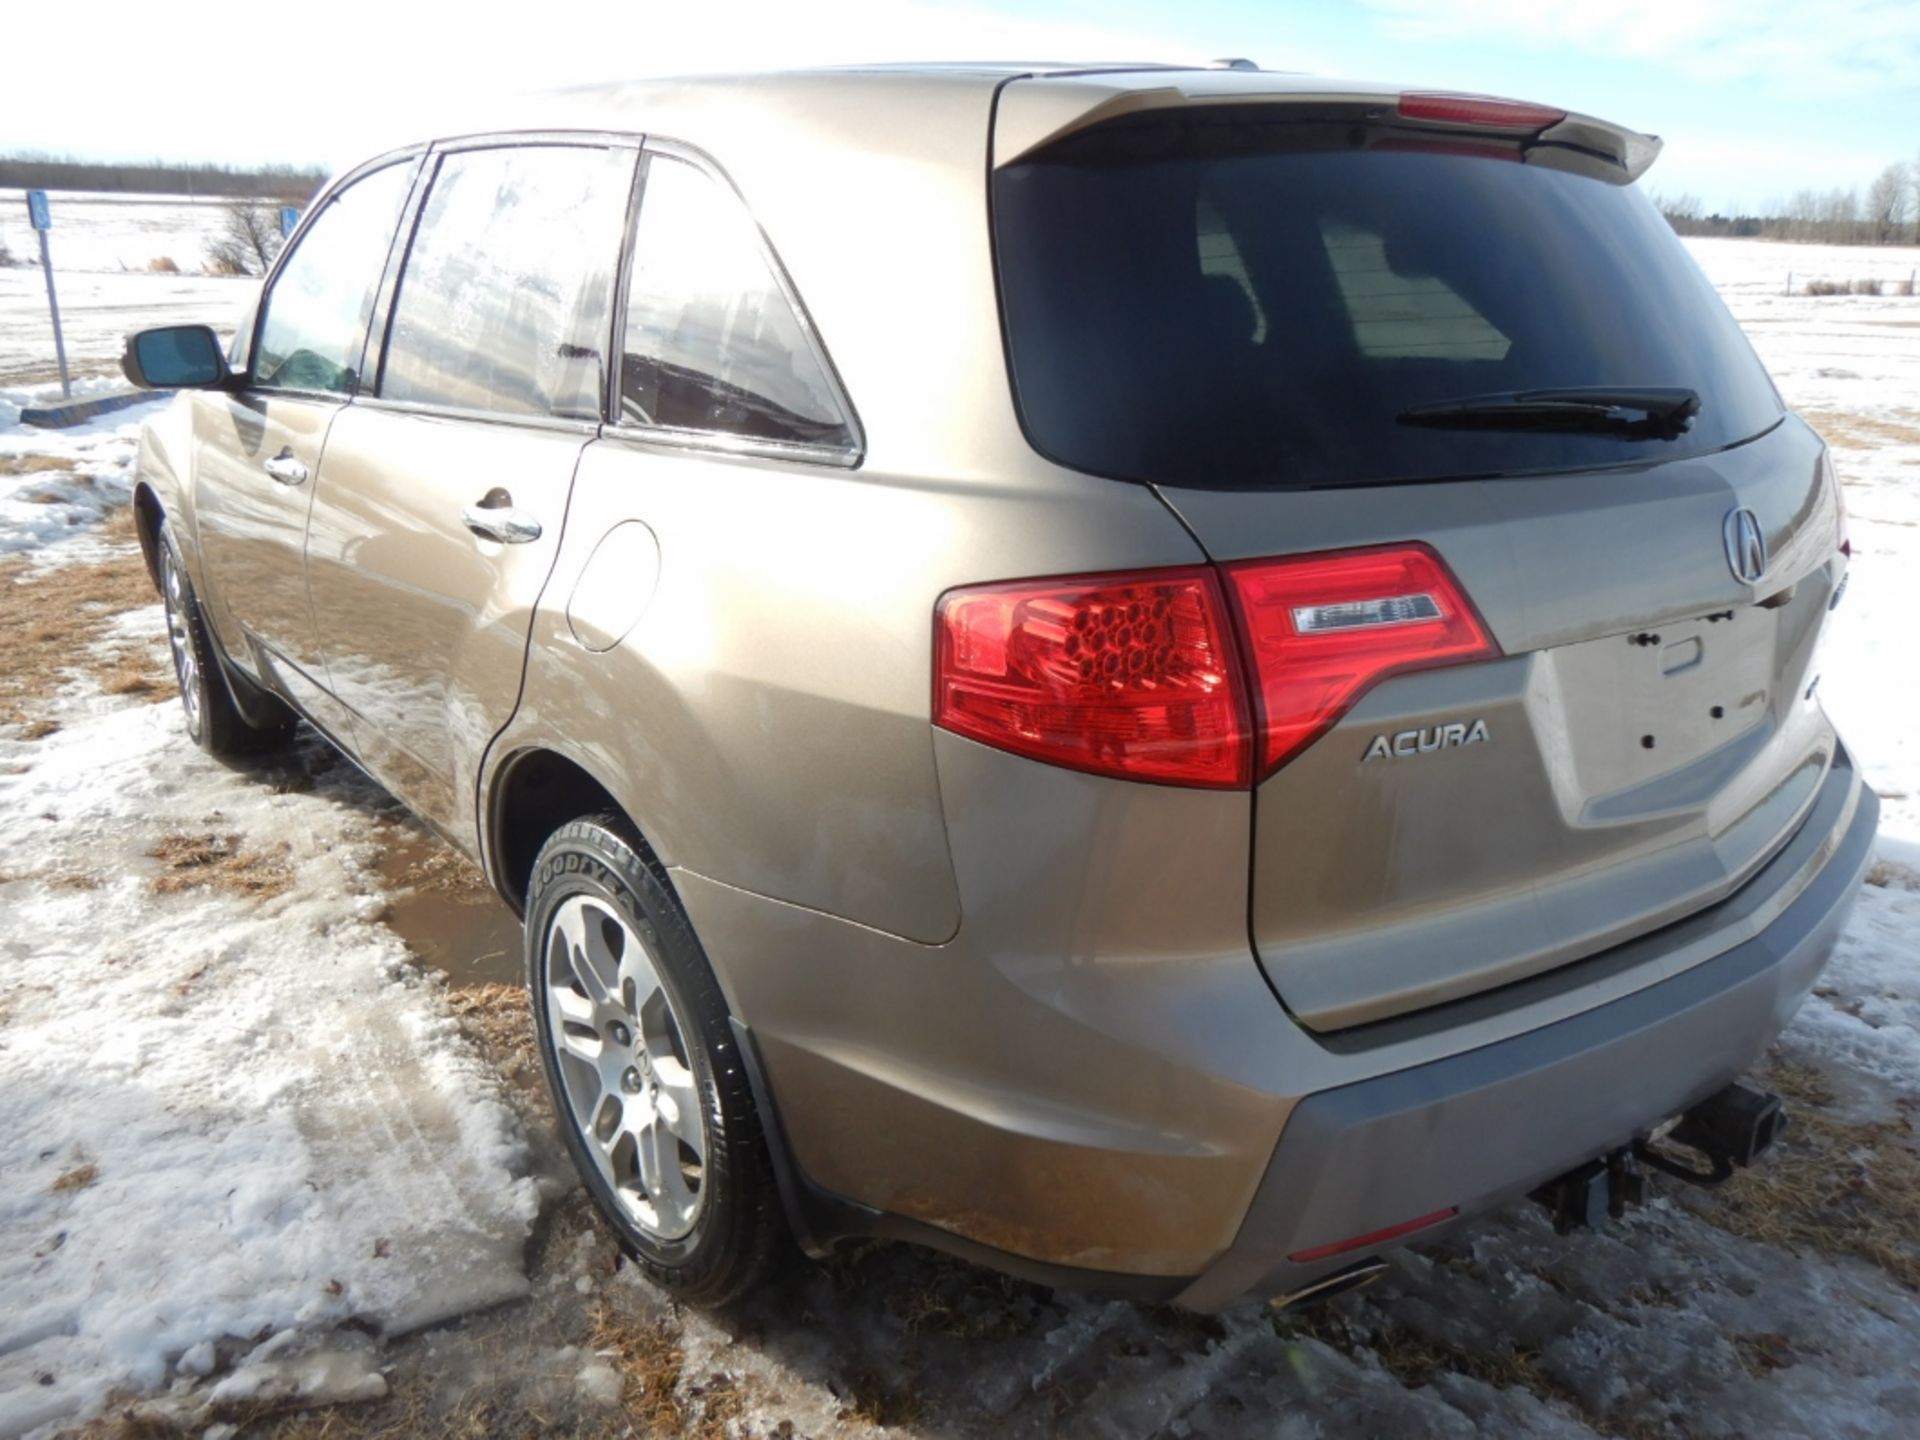 2009 ACURA MDX AWD, 3.7L, AT, SUV, LEATHER, HEATED SEATS, 230,006KM SHOWING, TIMING CHAIN RECENT R&R - Image 2 of 12